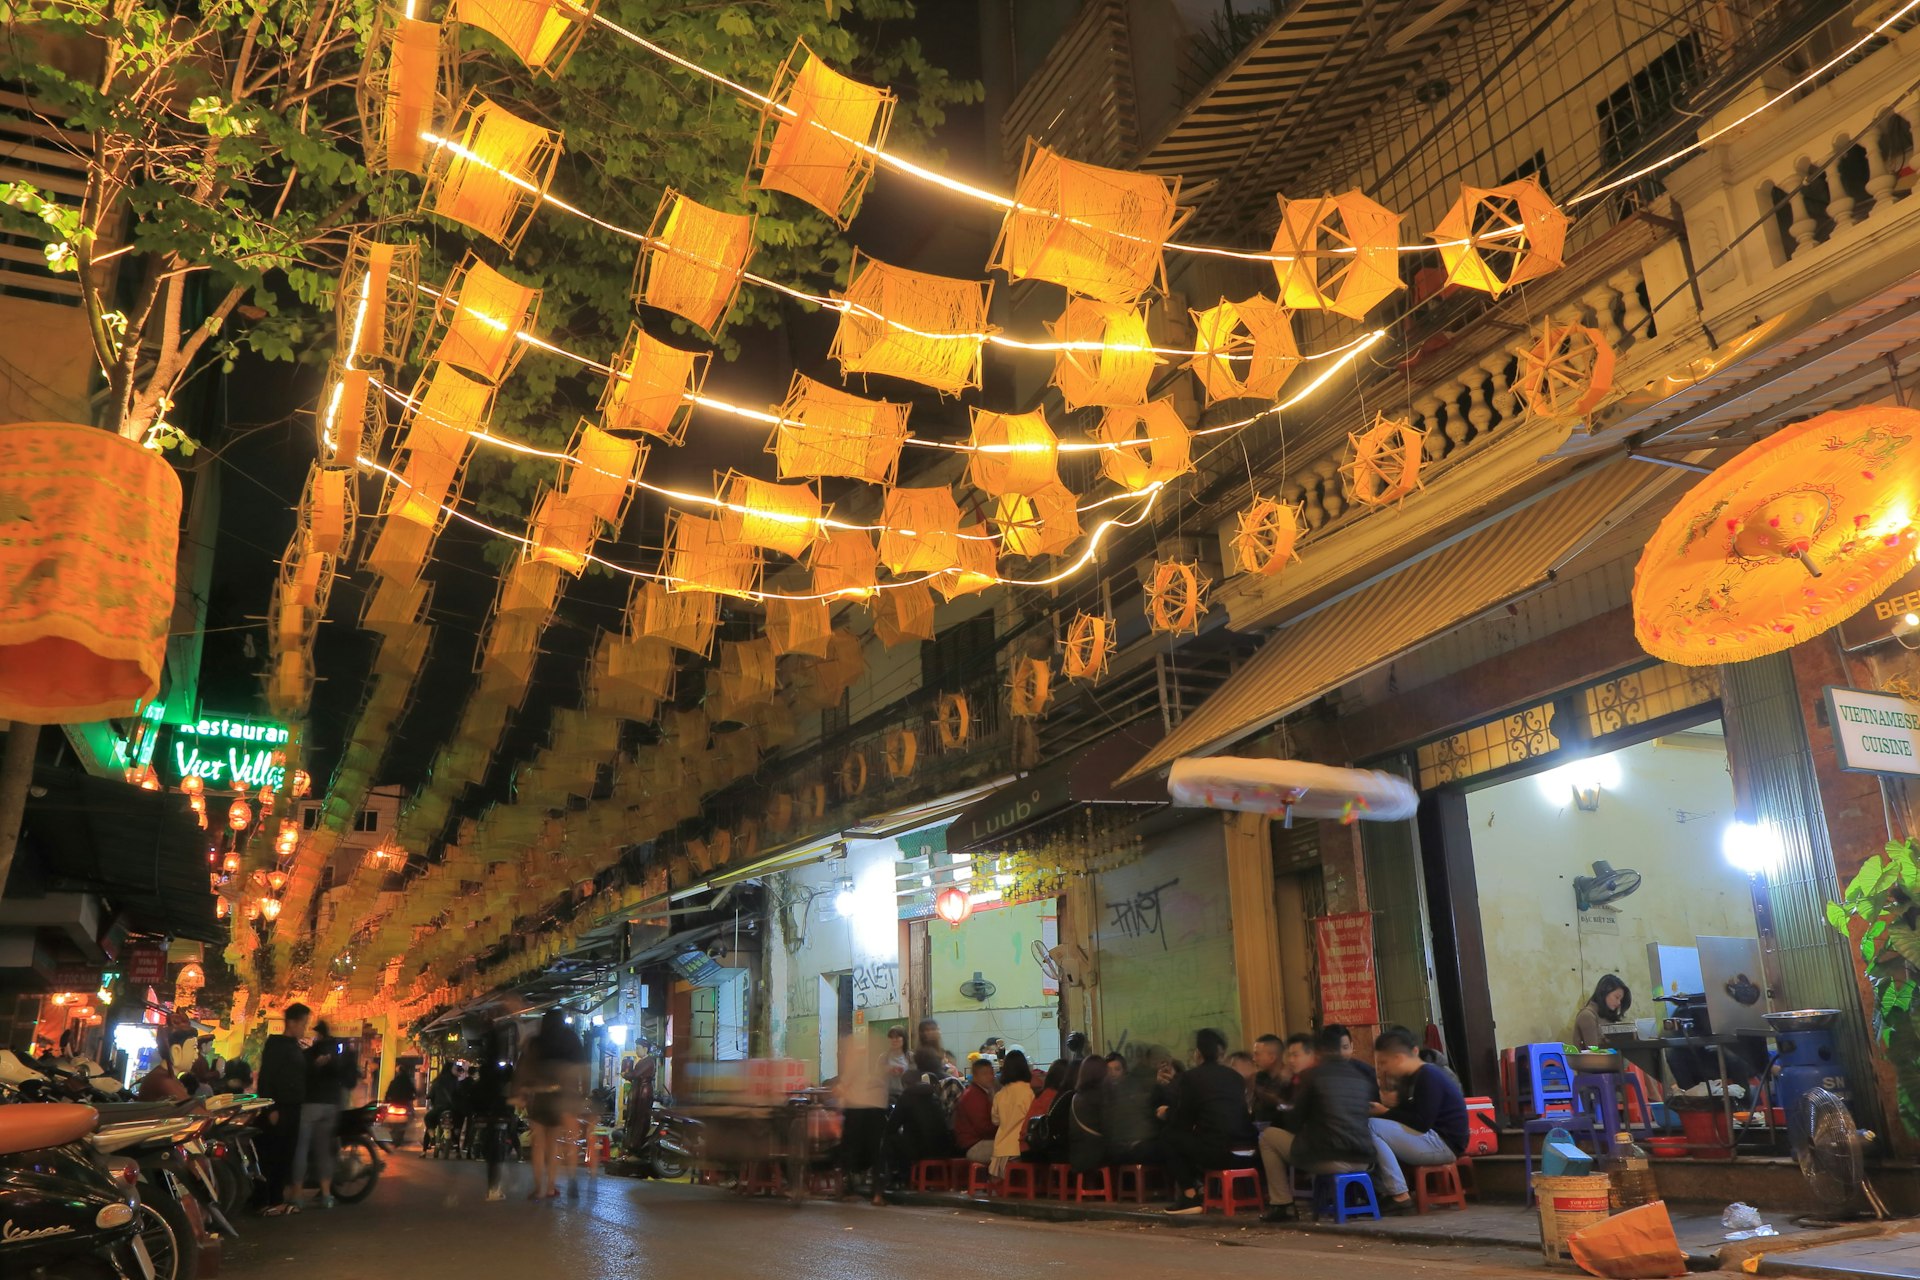 People sit outside bars and restaurants in Hanoi's Old Quarter. It is night and tables and chairs have been set out on the road outside the businesses.